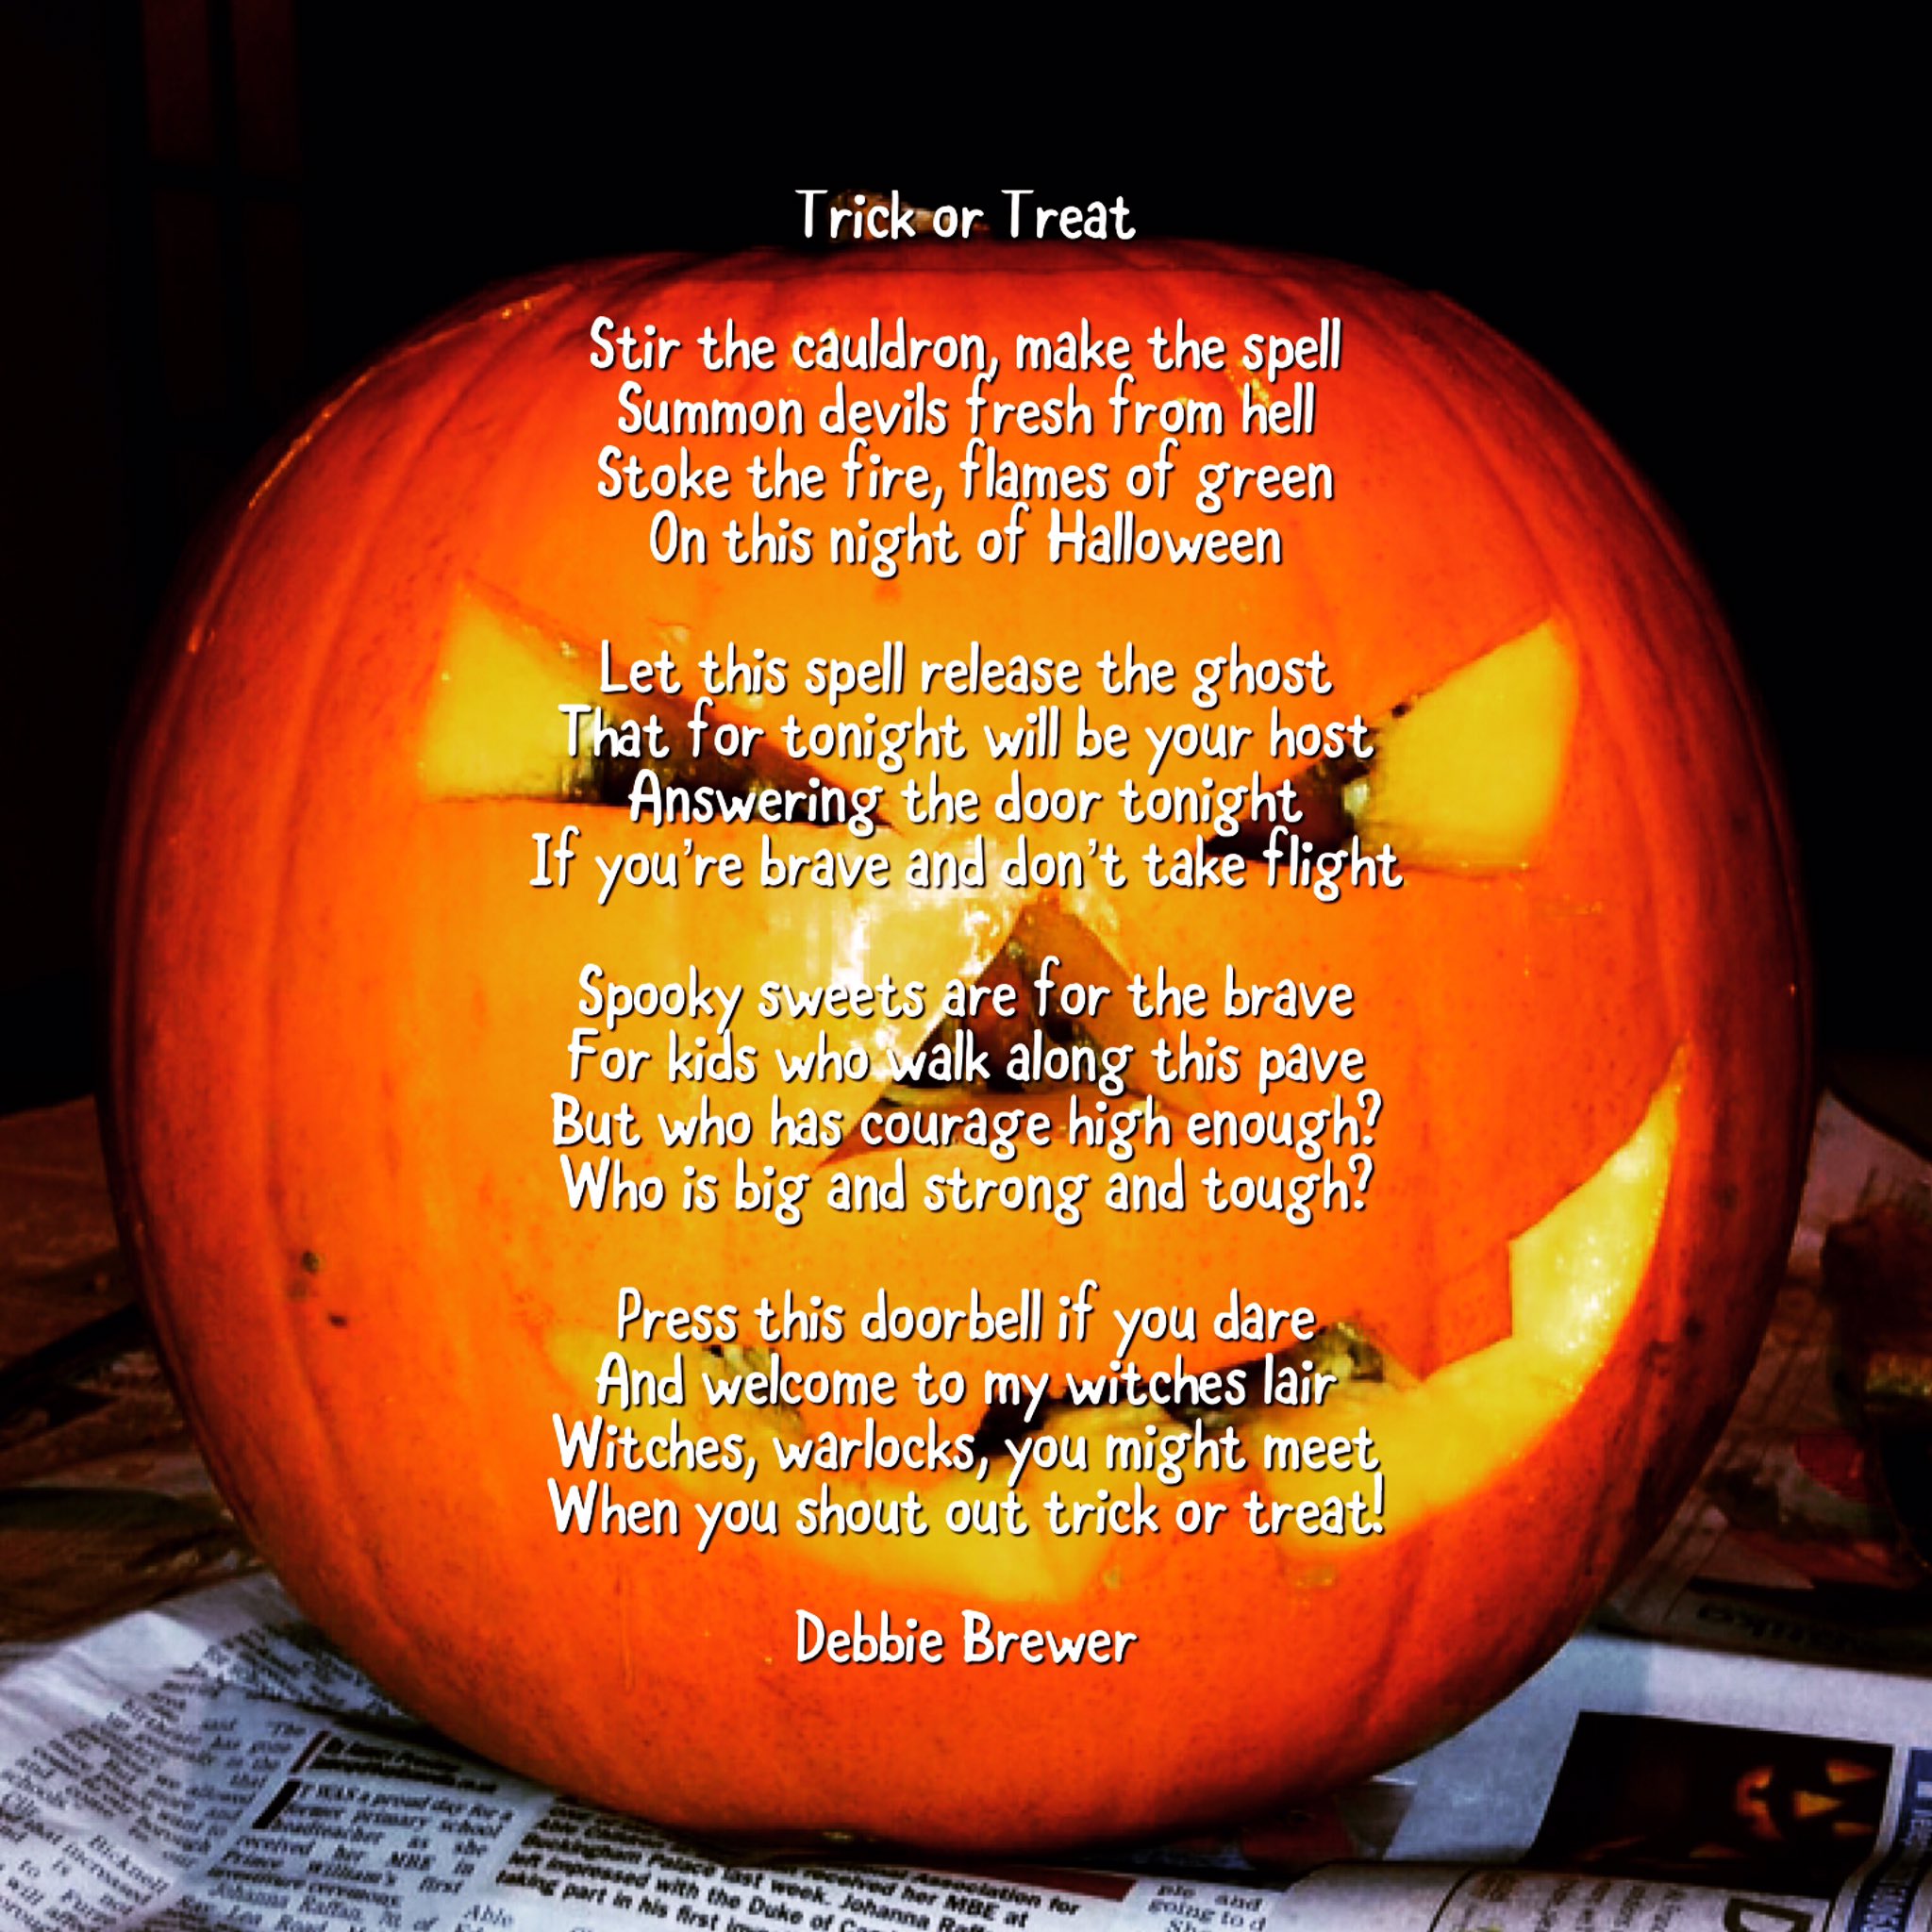 Books And Poetry on Twitter: "Happy Halloween! 🎃💀🎃☠️🎃👻🎃 Dare you ring  the bell and shout “trick or treat”? #halloween #ghosts #witches #book  #books #poem #poems #poetry #halloweenfun #devils #scary #bookshelf  #poetrycommunity #bookworm #